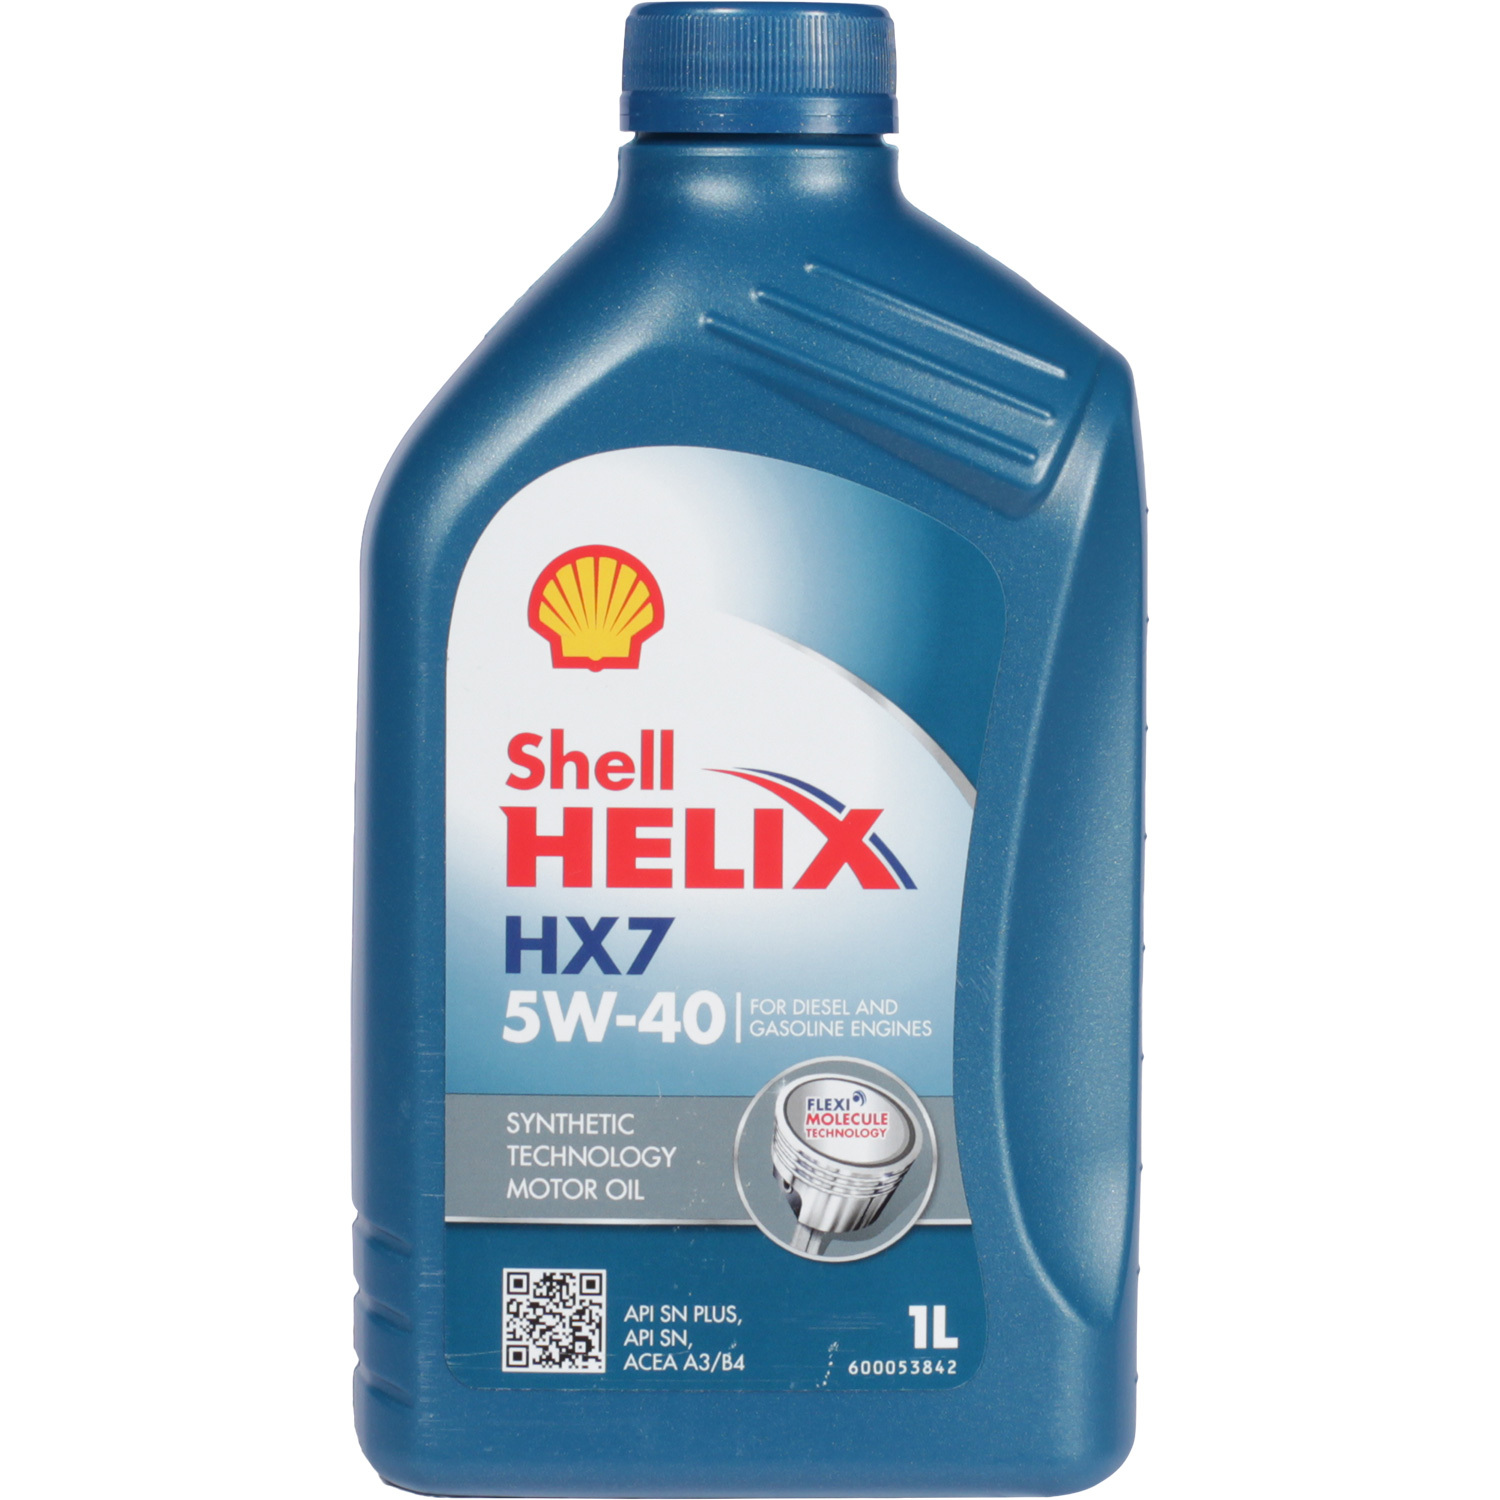 Shell Моторное масло Shell Helix HX7 5W-40, 1 л масло моторное shell helix ultra 5w 40 1 л